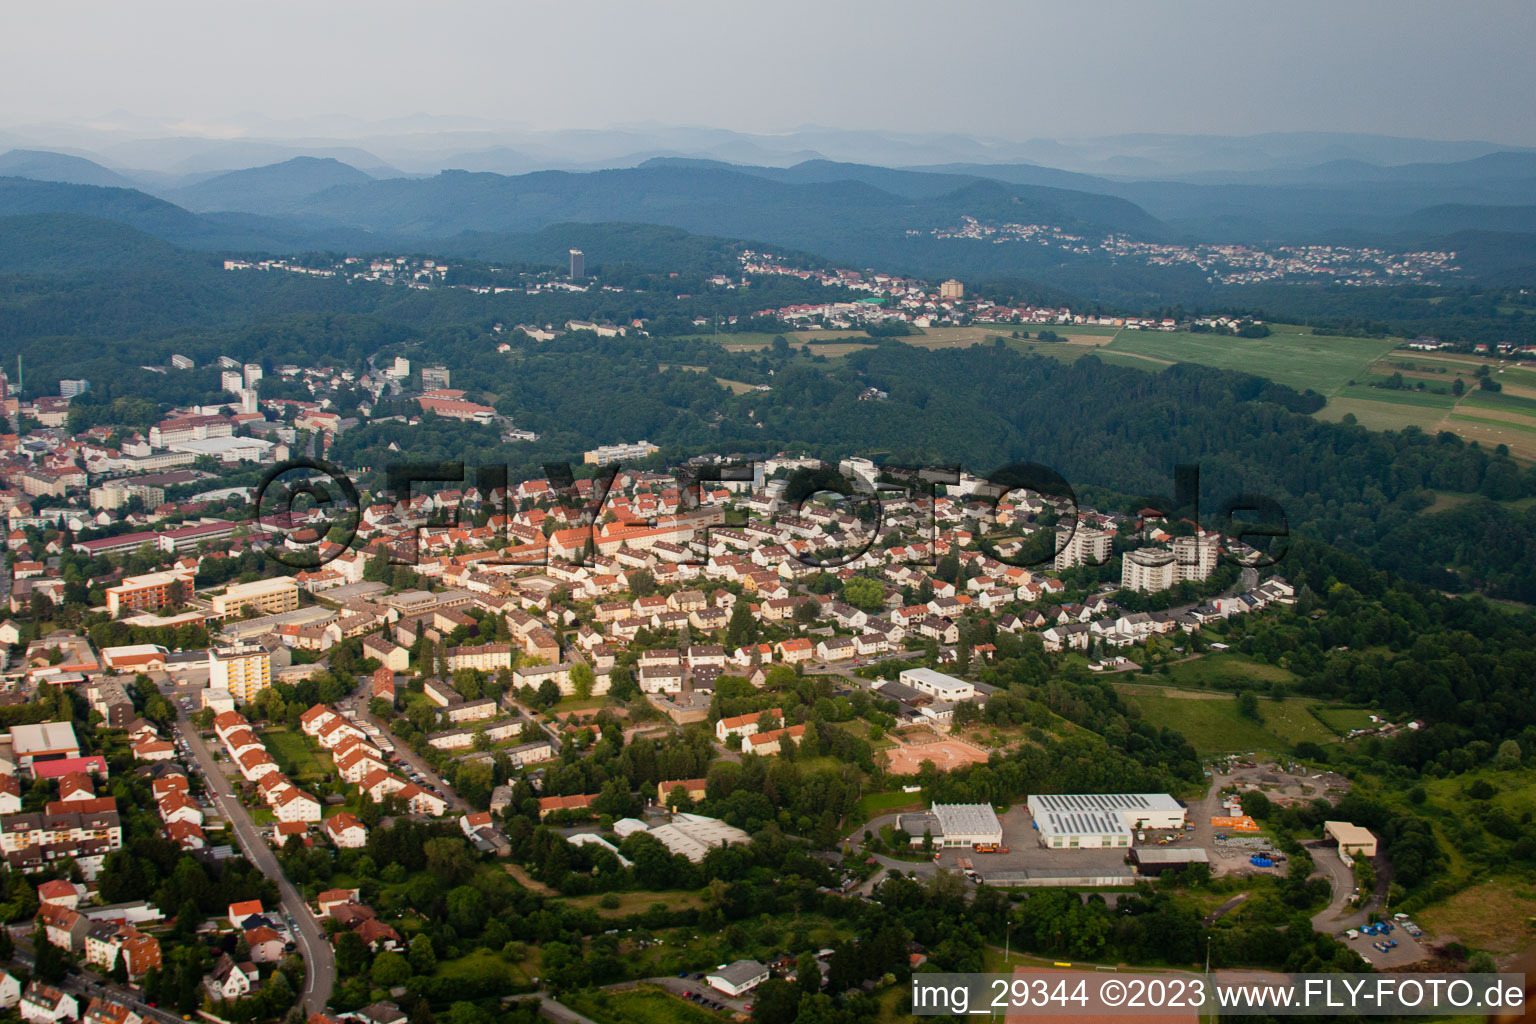 Pirmasens in the state Rhineland-Palatinate, Germany viewn from the air